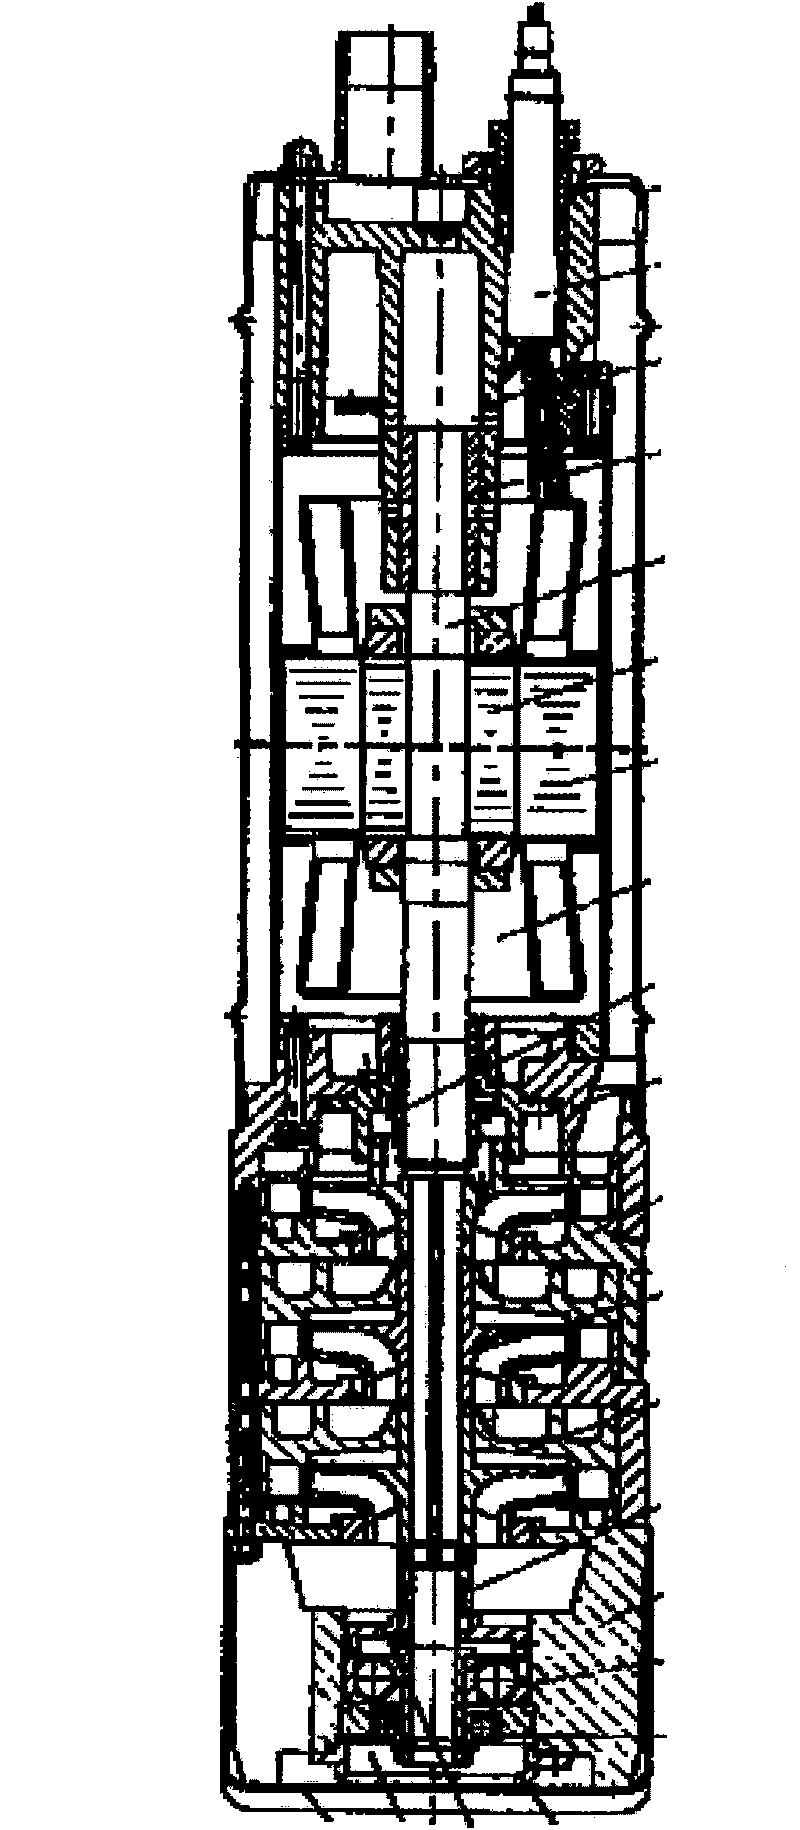 Upper water and wire outlet structure of built-in submerged motor pump